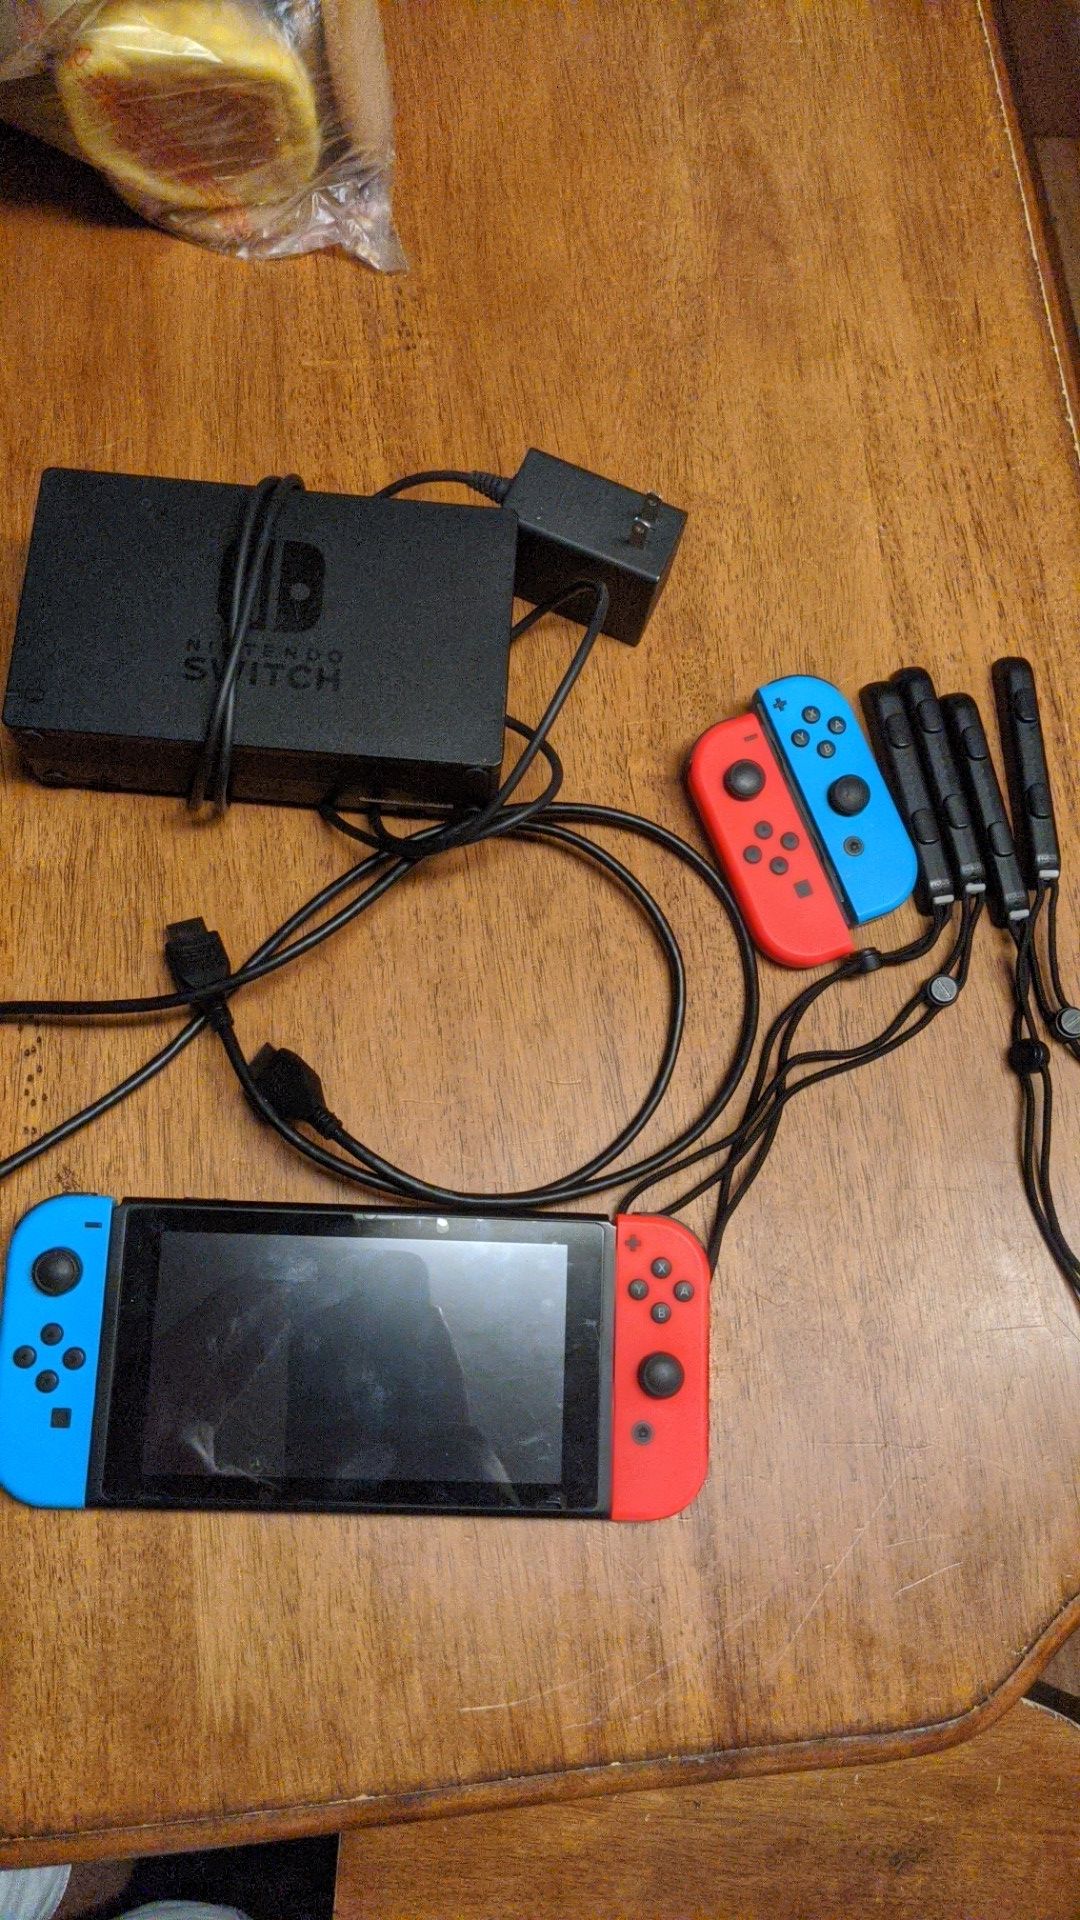 Nintendo switch with 4 contolers with 128gb memory